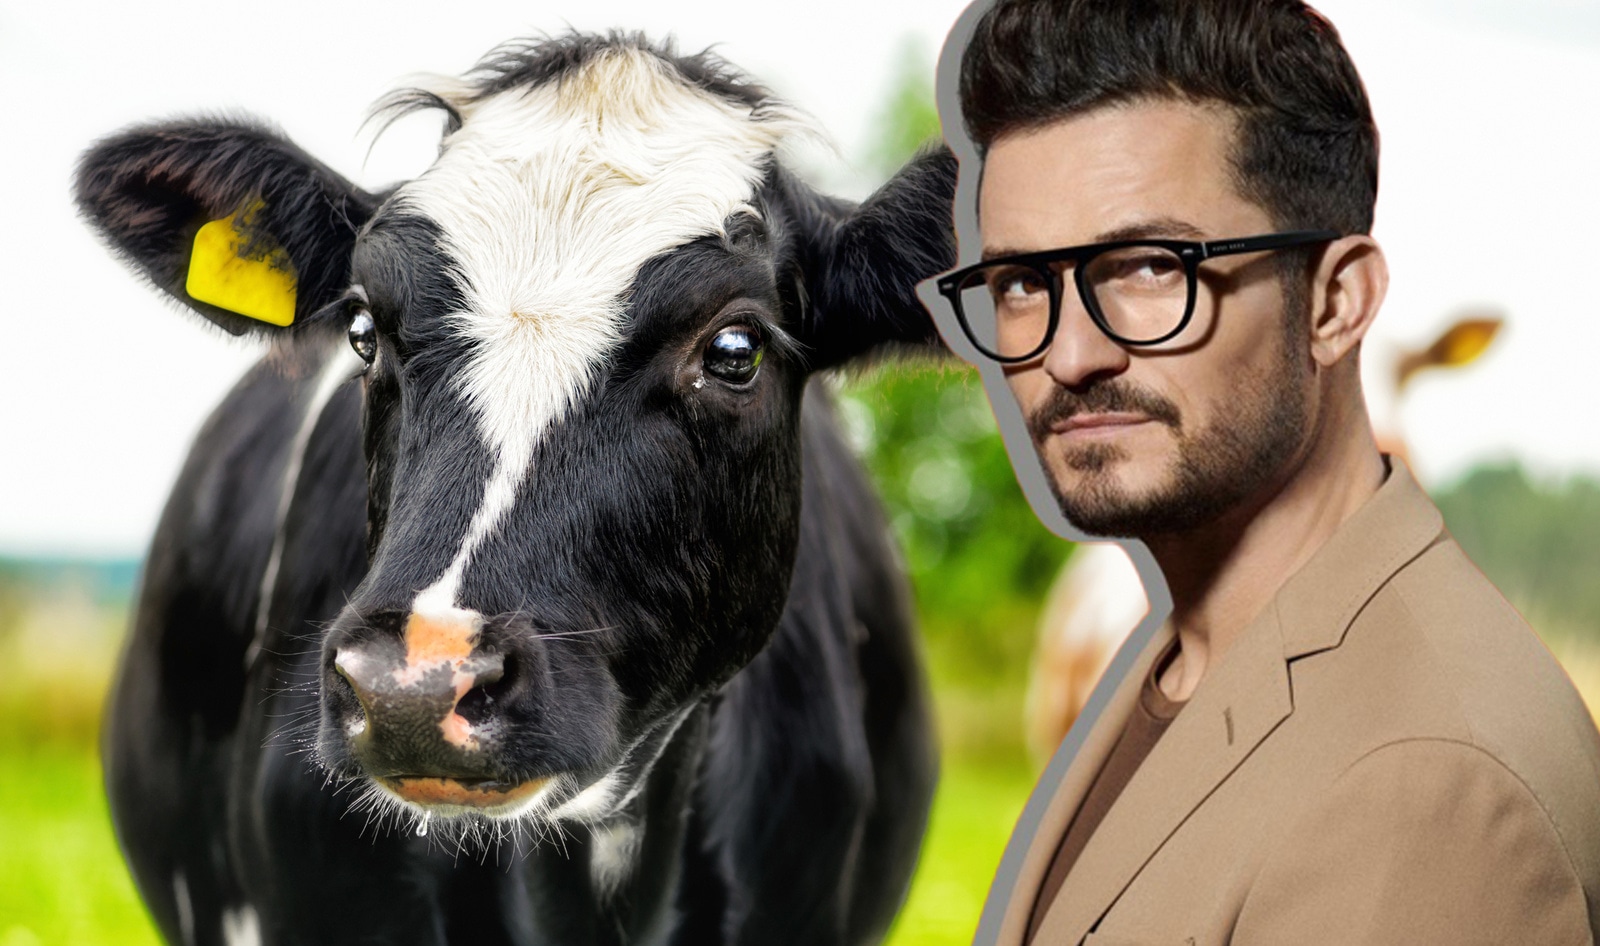 Orlando Bloom Is 90-Percent Vegan Because “Cows are Beautiful”